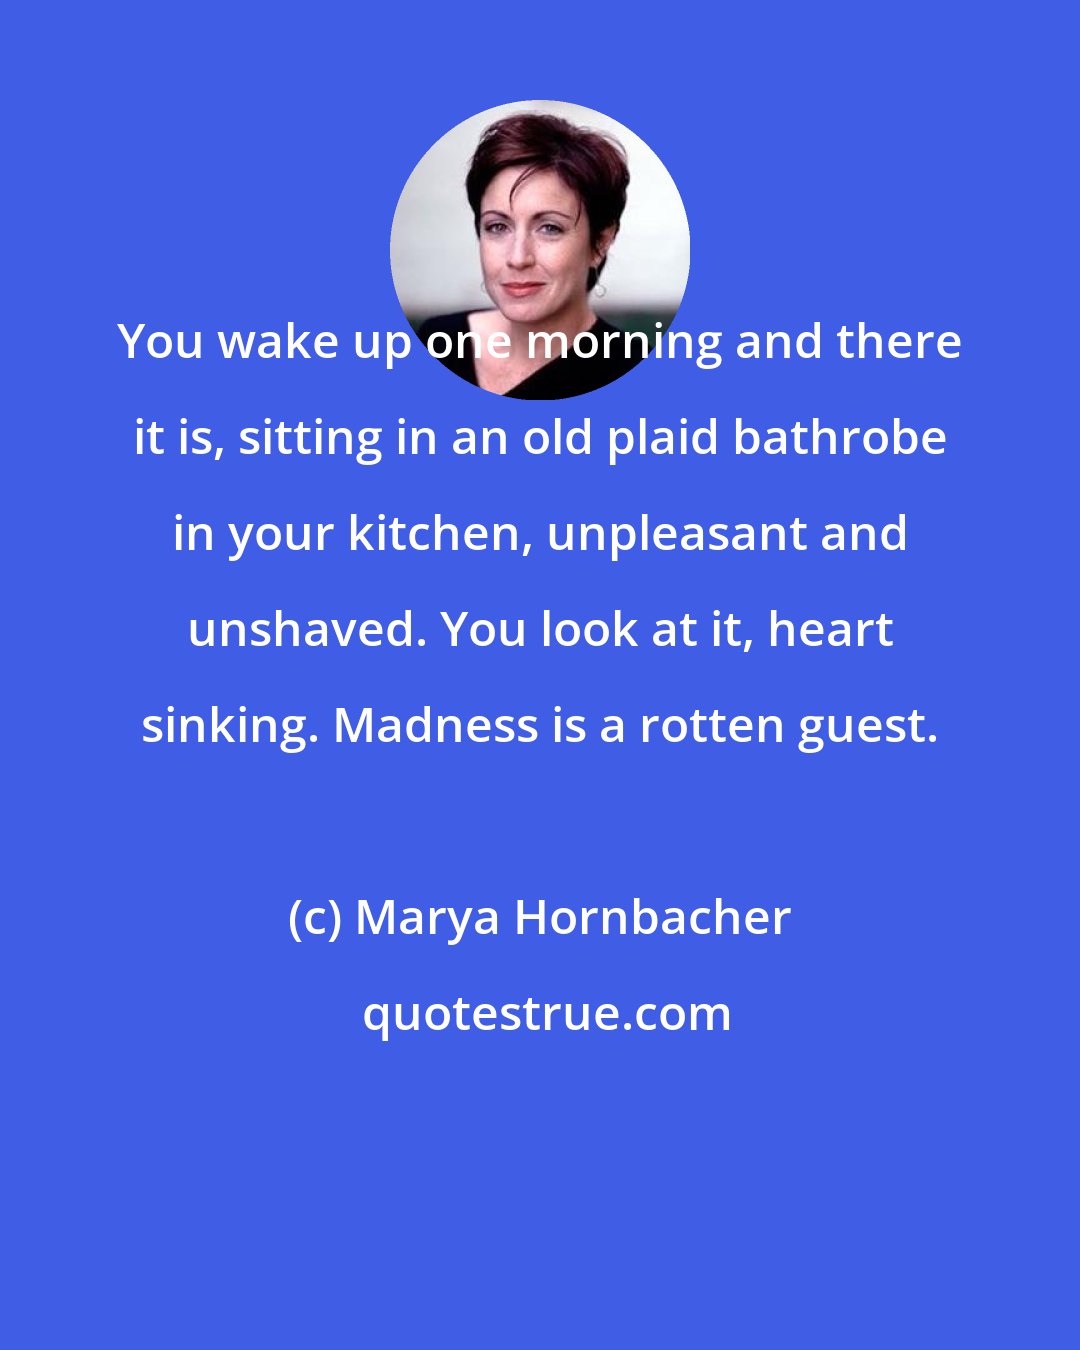 Marya Hornbacher: You wake up one morning and there it is, sitting in an old plaid bathrobe in your kitchen, unpleasant and unshaved. You look at it, heart sinking. Madness is a rotten guest.